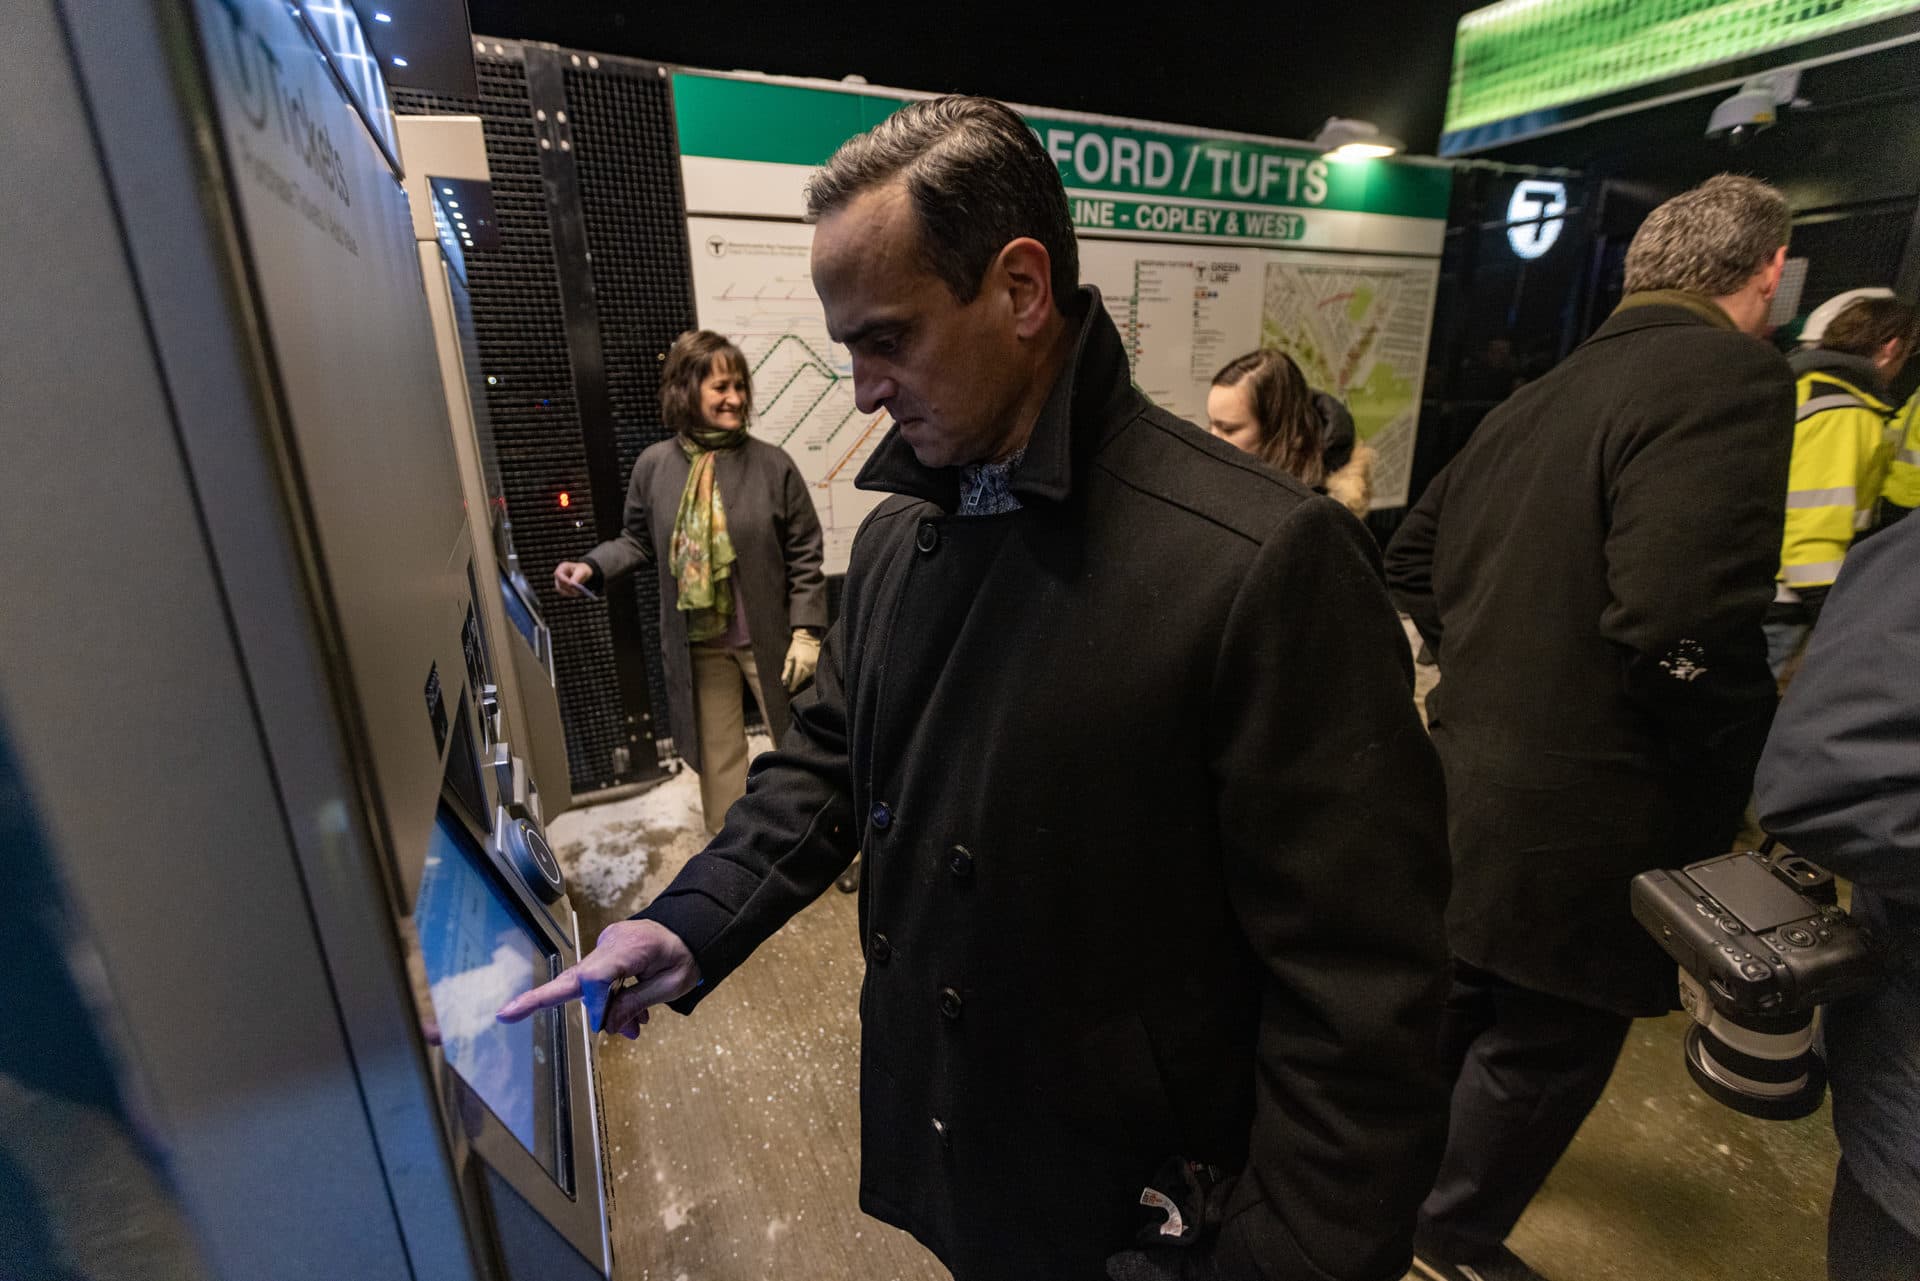 Former Somerville Mayor Joe Curtatone and current Somerville Mayor Katjana Ballantyne purchase fares before riding the first train on the Green Line Extension into Somerville. (Jesse Costa/WBUR)